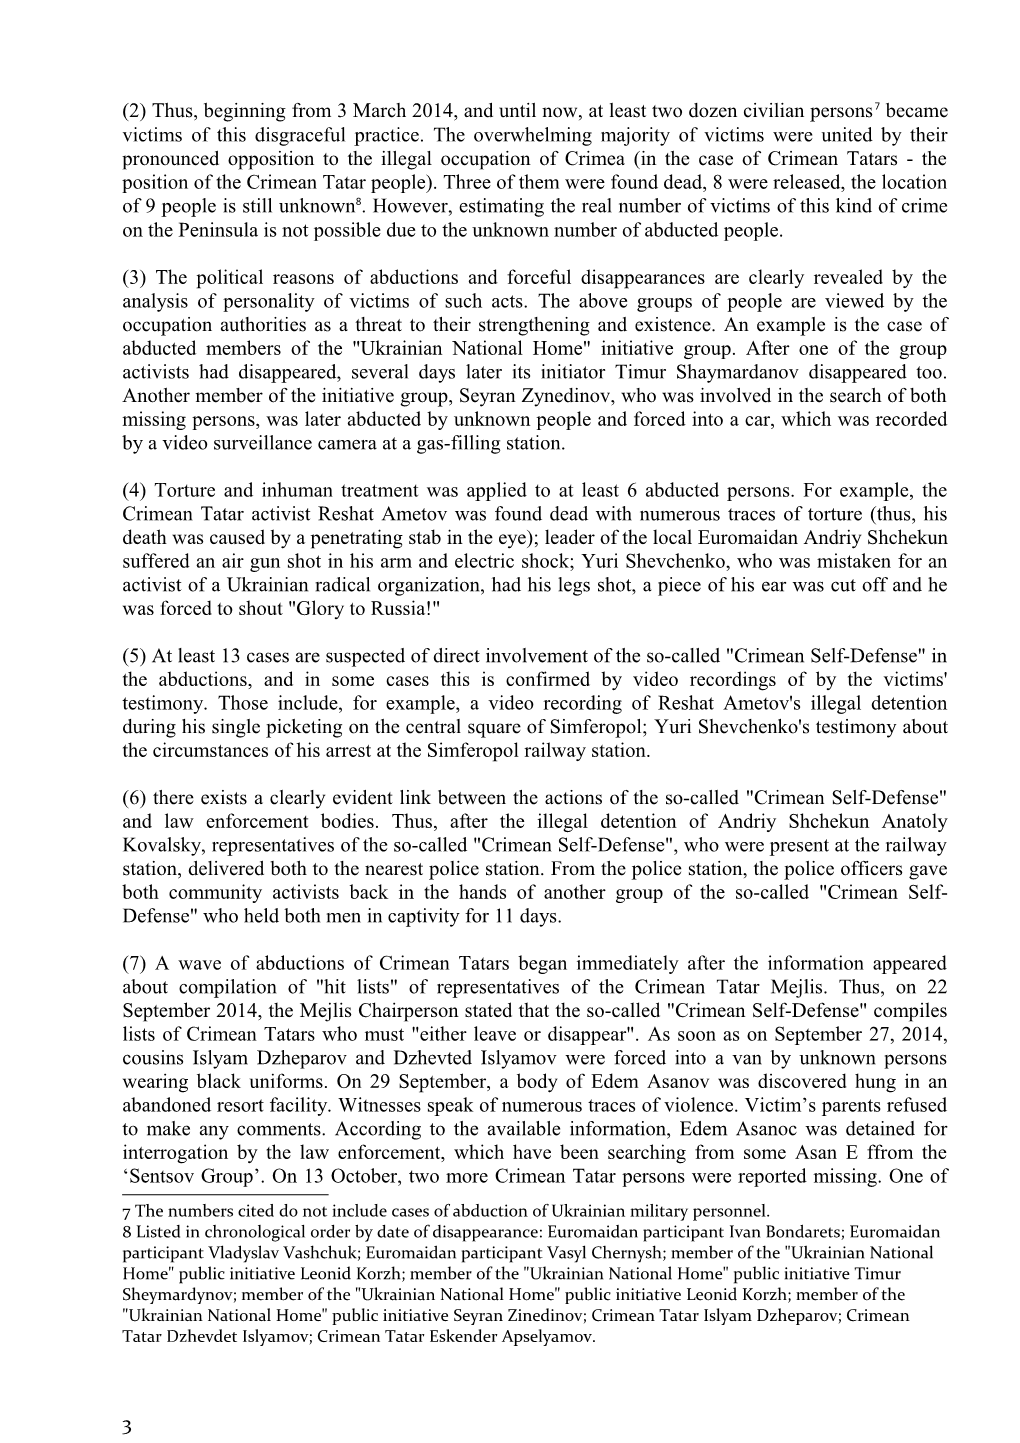 Communication Within ICCPR on Violations Committed by the Russian Federation on the Territory